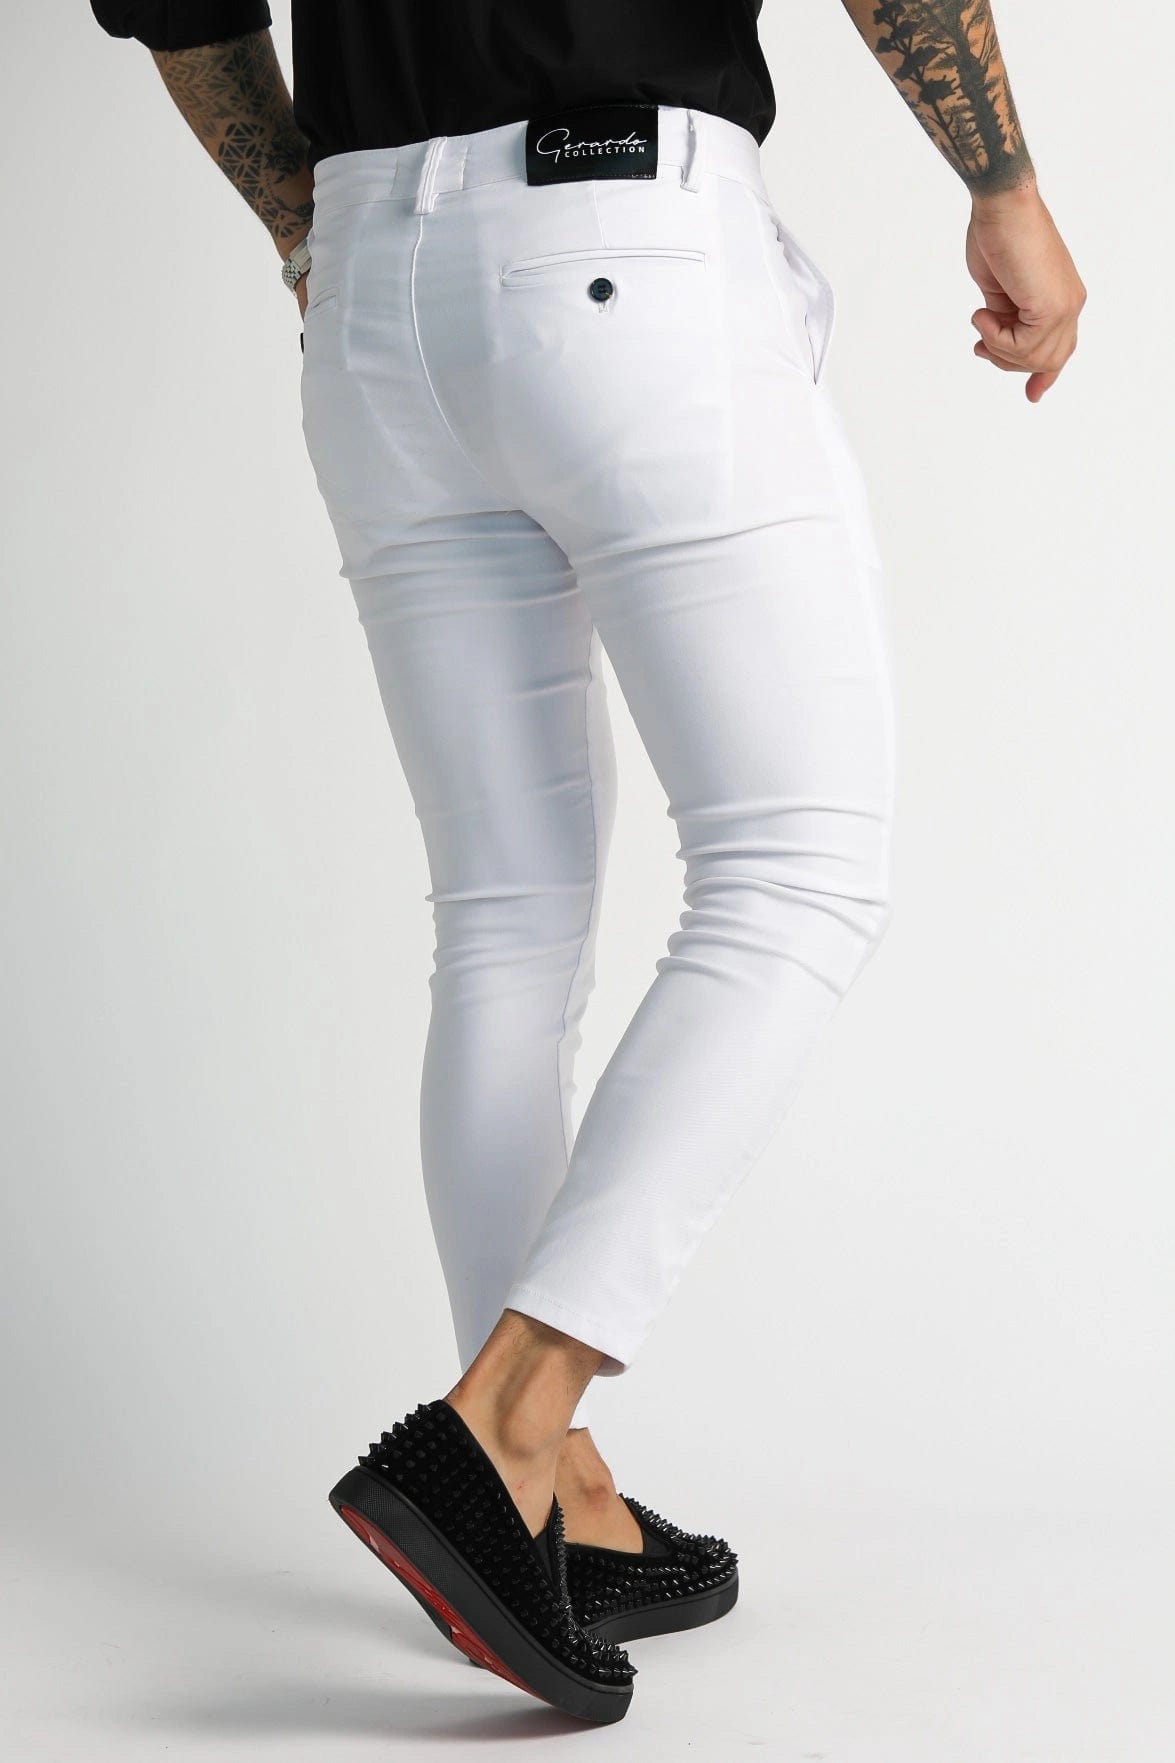 9 pairs of white pants for men: J.Crew, Levi's and more - Reviewed